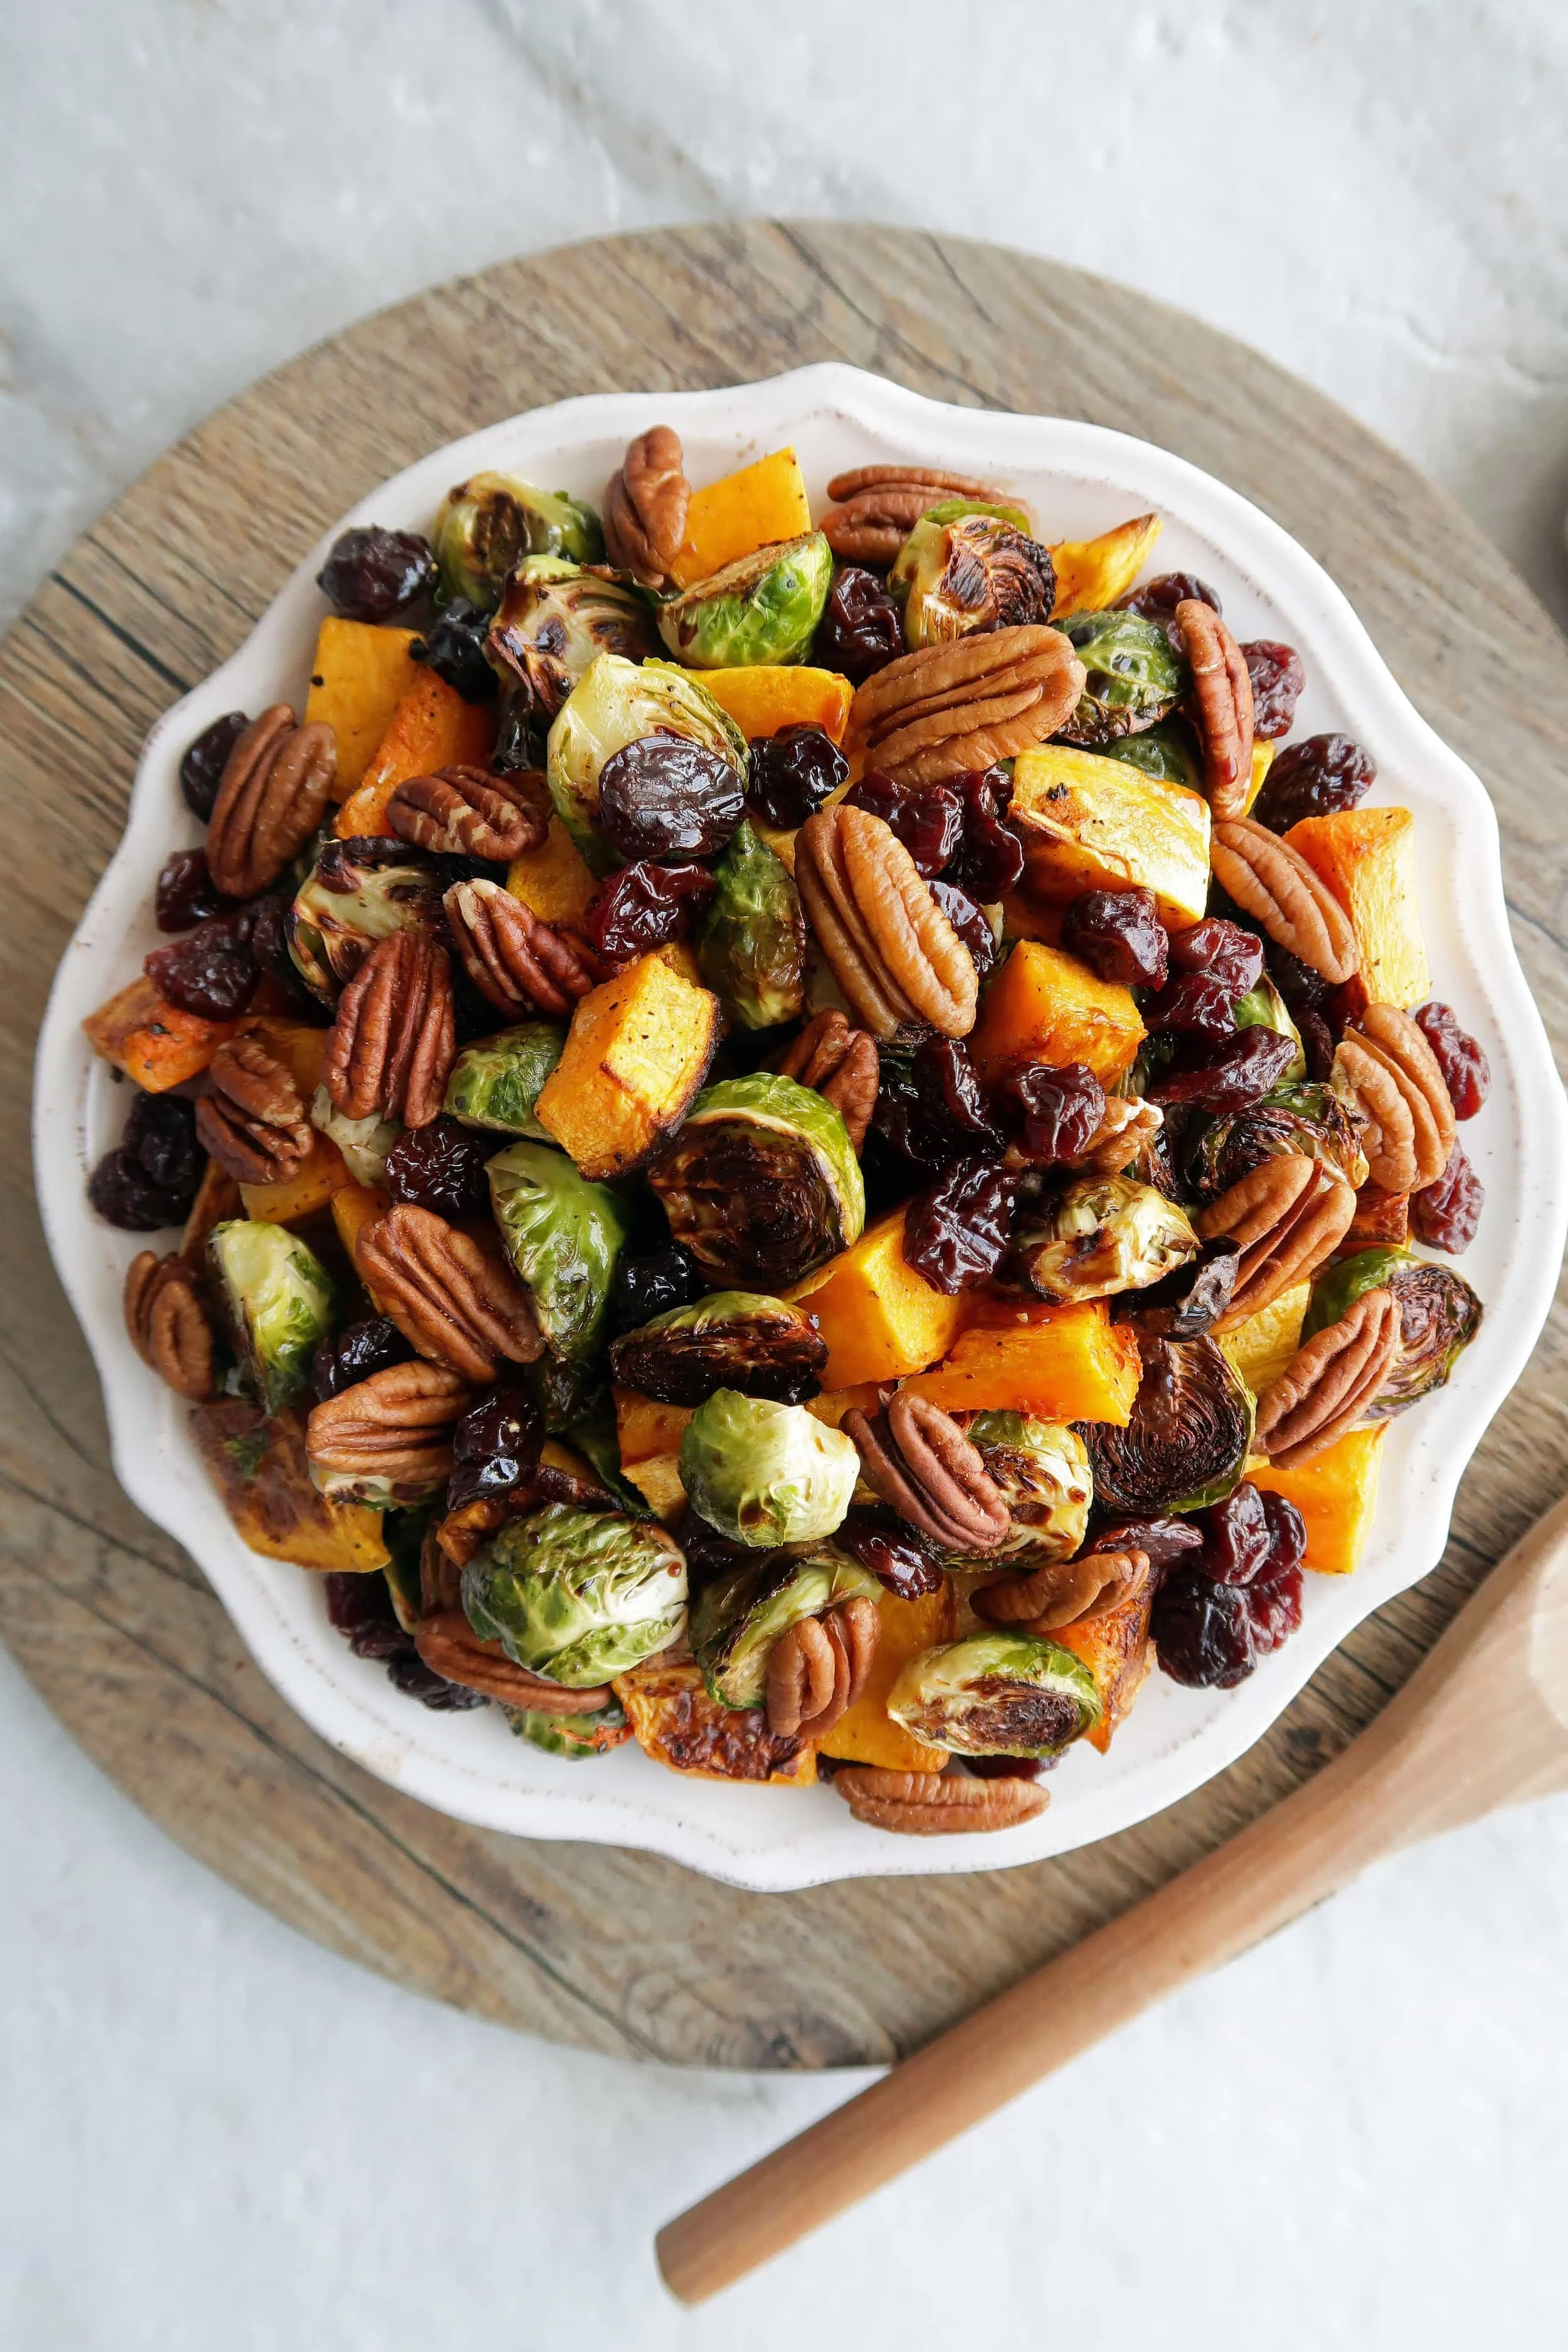 Roasted butternut squash and Brussels sprouts with pecans and dried cherries on a white plate.